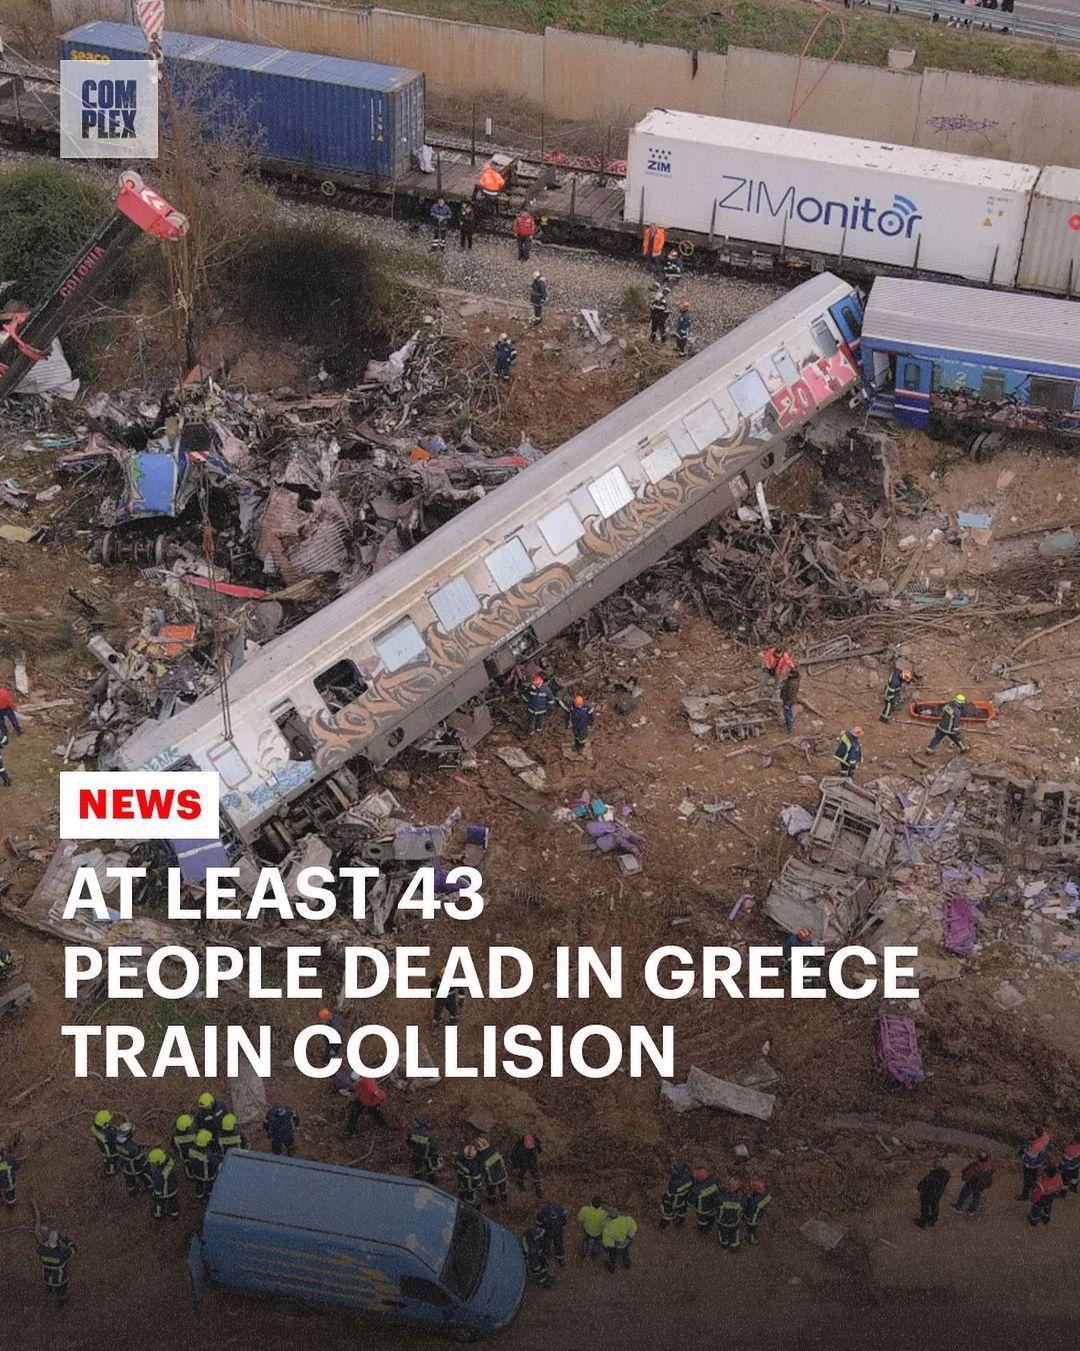 class="content__text"
 At least 43 people were killed in a tragic train collision in Greece today. Link in bio 🔗 for more. 
 